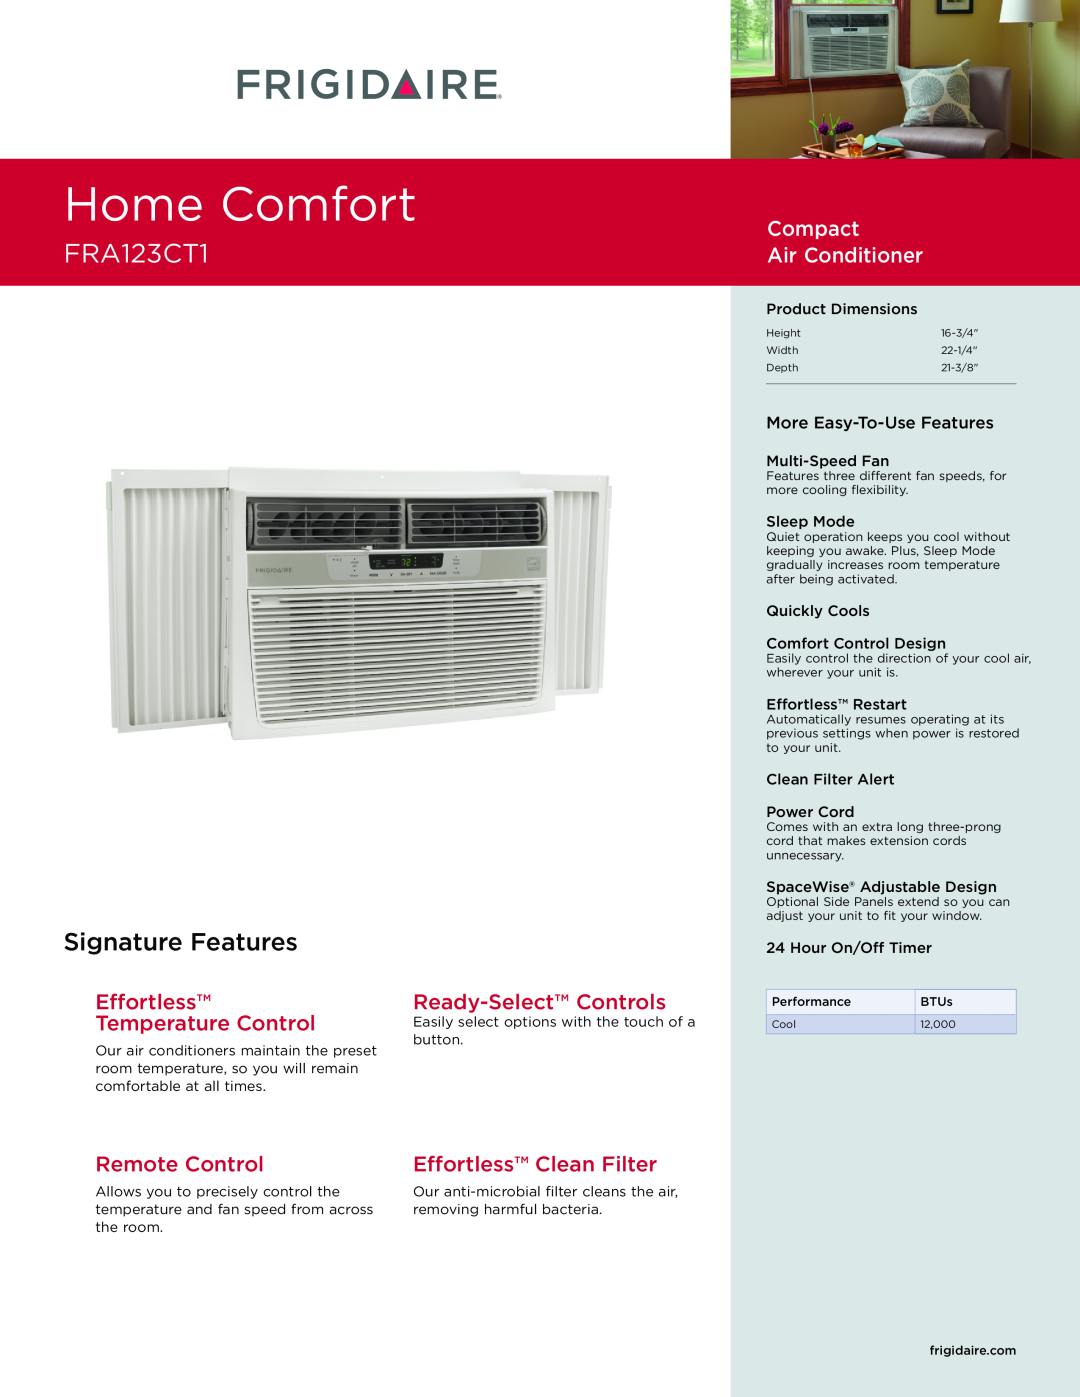 Frigidaire FRA123CT1 dimensions Home Comfort, Signature Features, Compact Air Conditioner , Effortless Temperature Control 